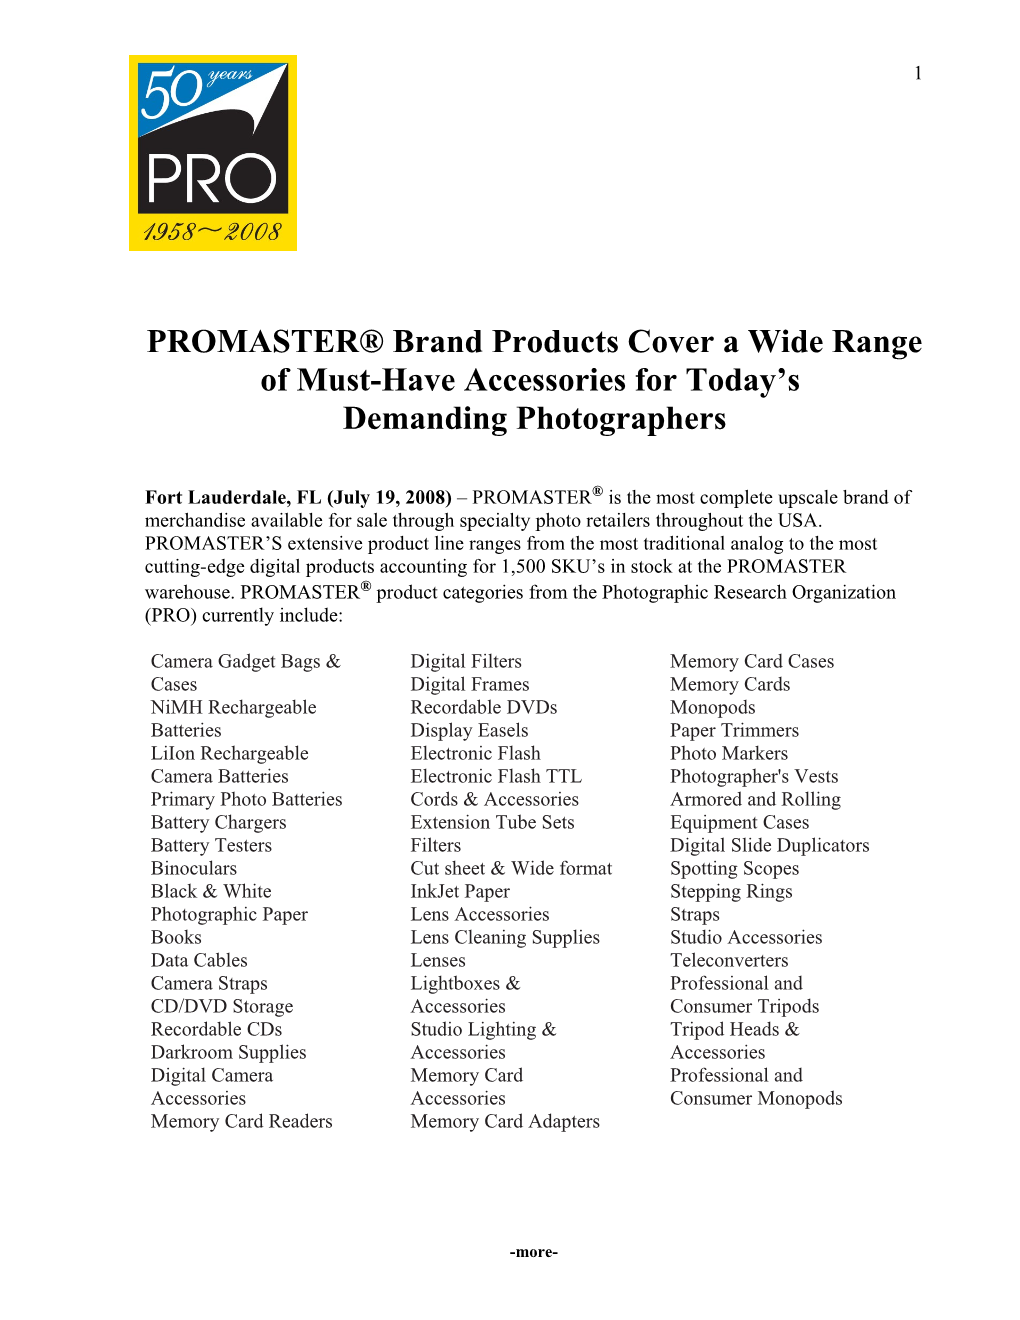 PROMASTER Brand Products Cover a Wide Range of Must-Have Accessories for Today S